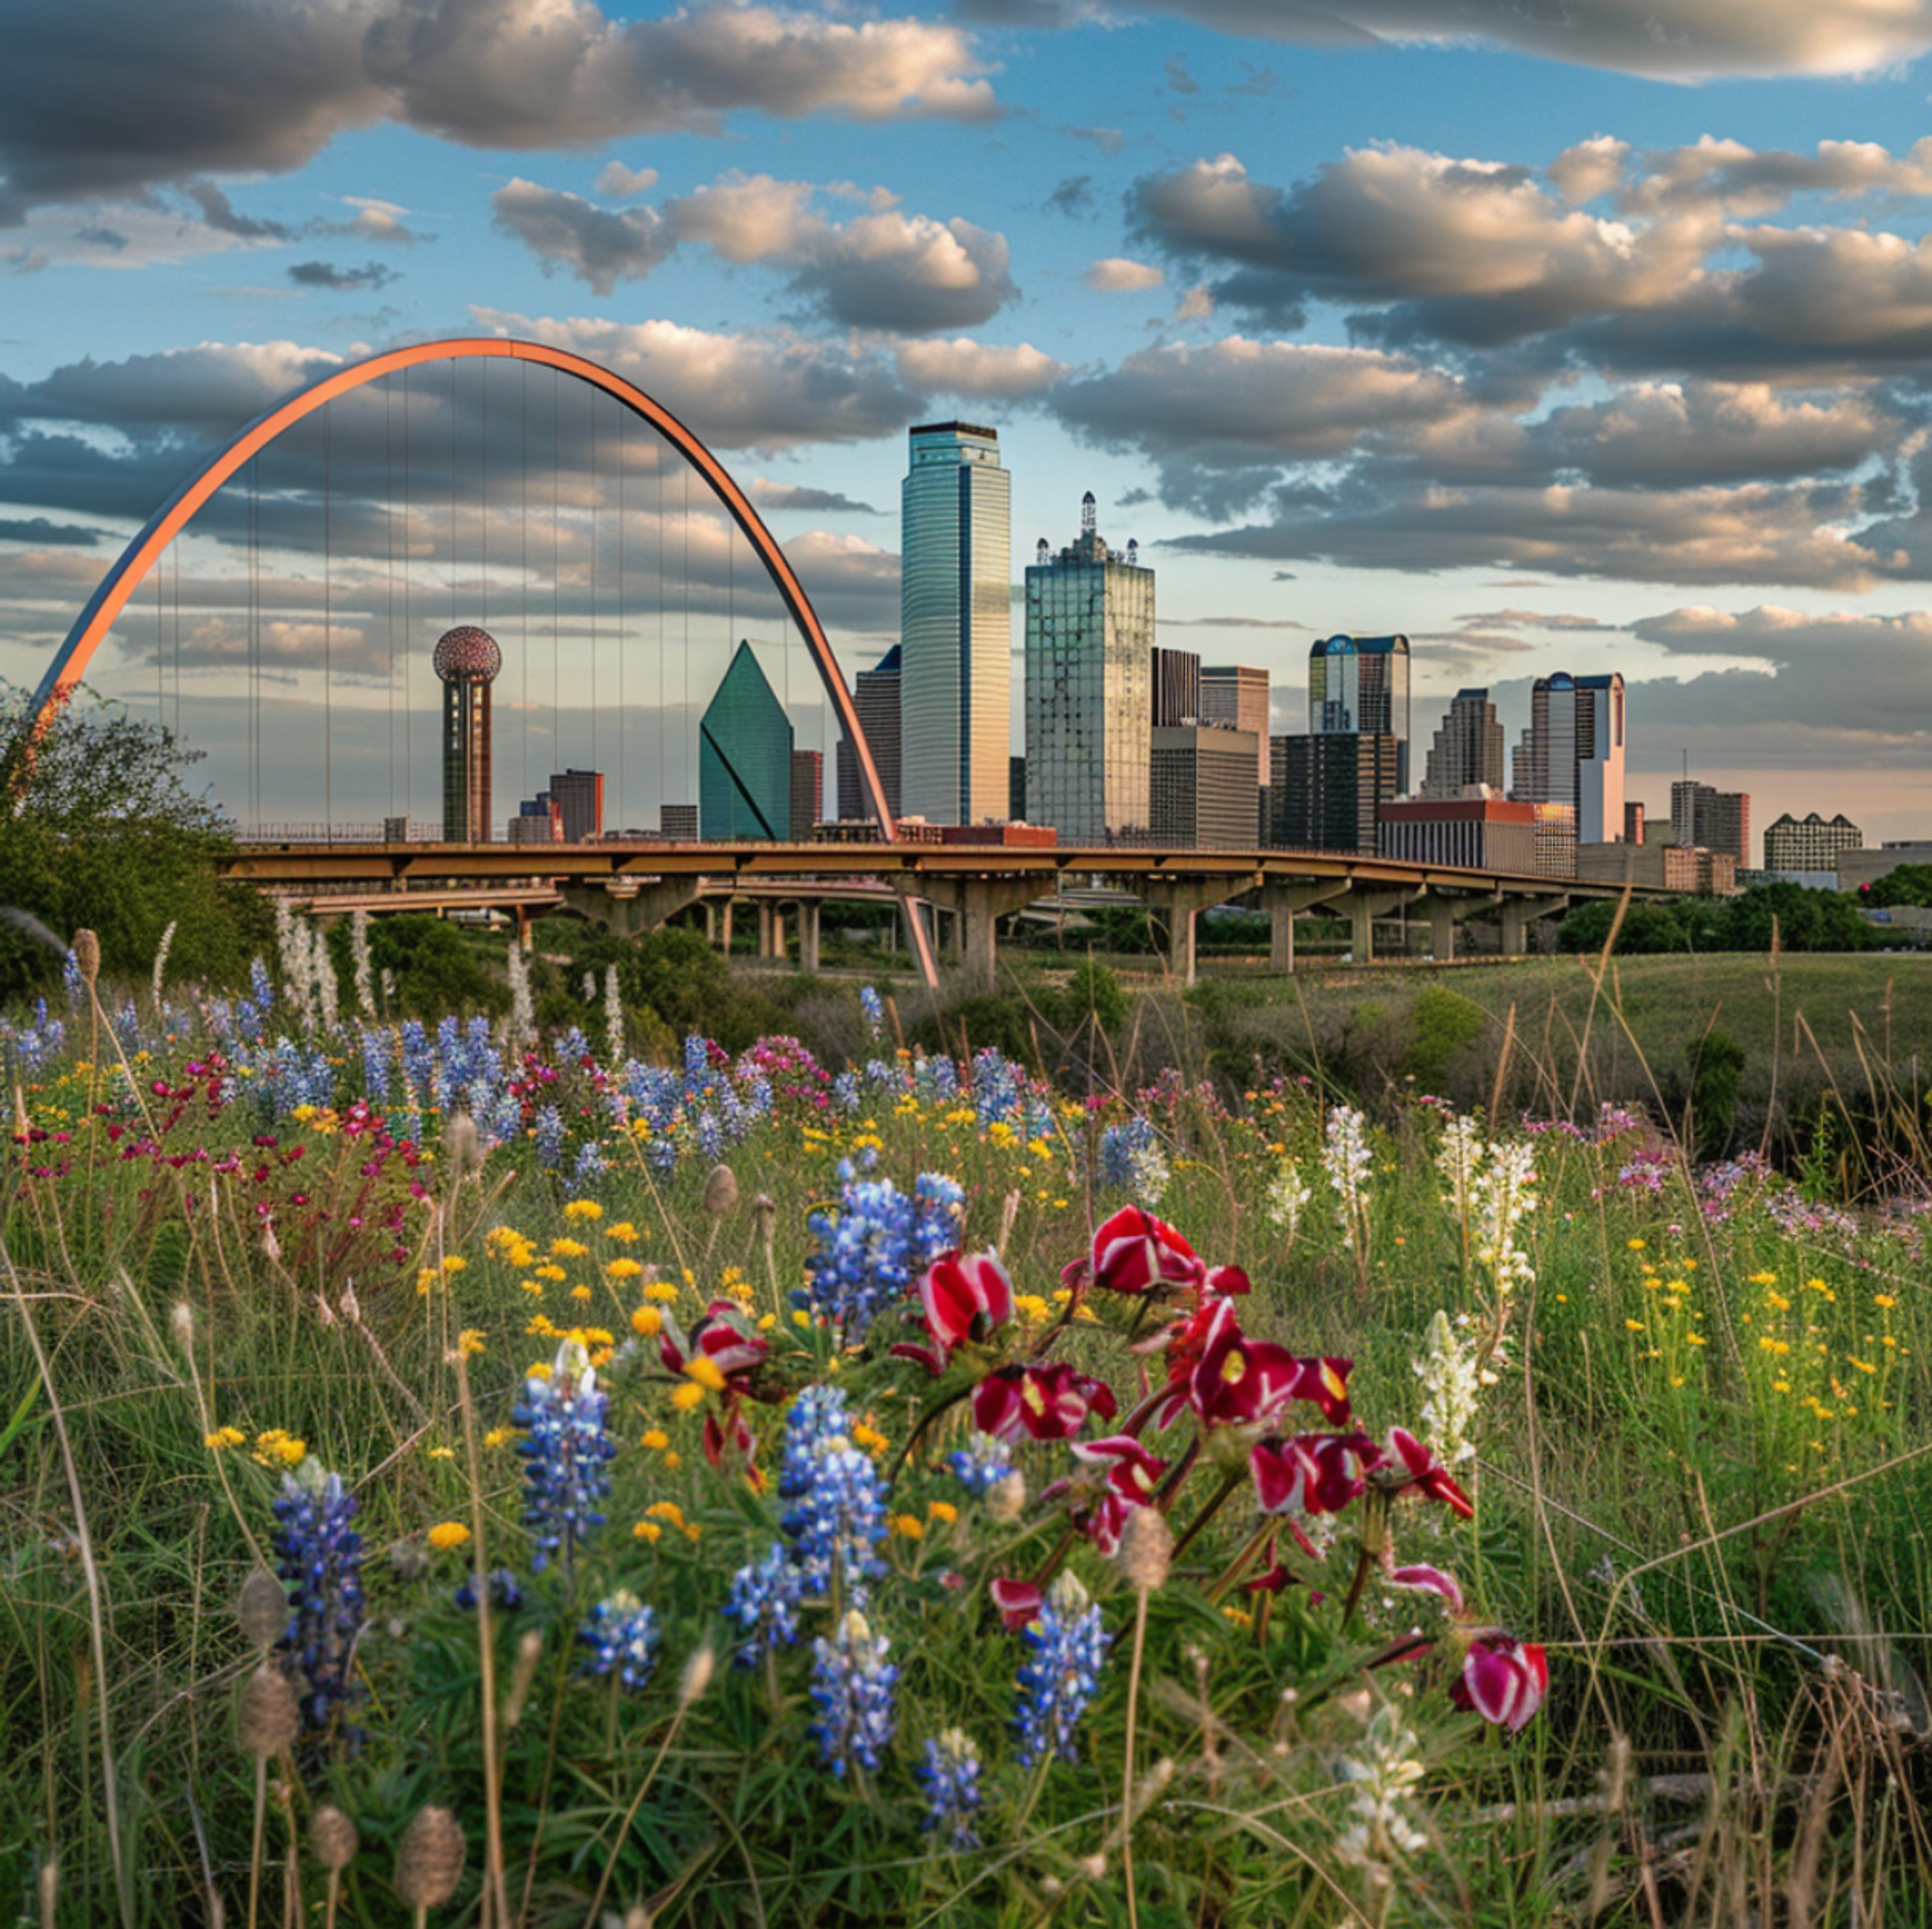 Wildflowers in bloom with a mix of bluebonnets, Indian paintbrushes, and other Texas natives in the foreground, with the Margaret Hunt Hill Bridge and the distinct Dallas skyline, including Reunion Tower, set against a backdrop of a dramatic cloud-streaked sky at dusk.